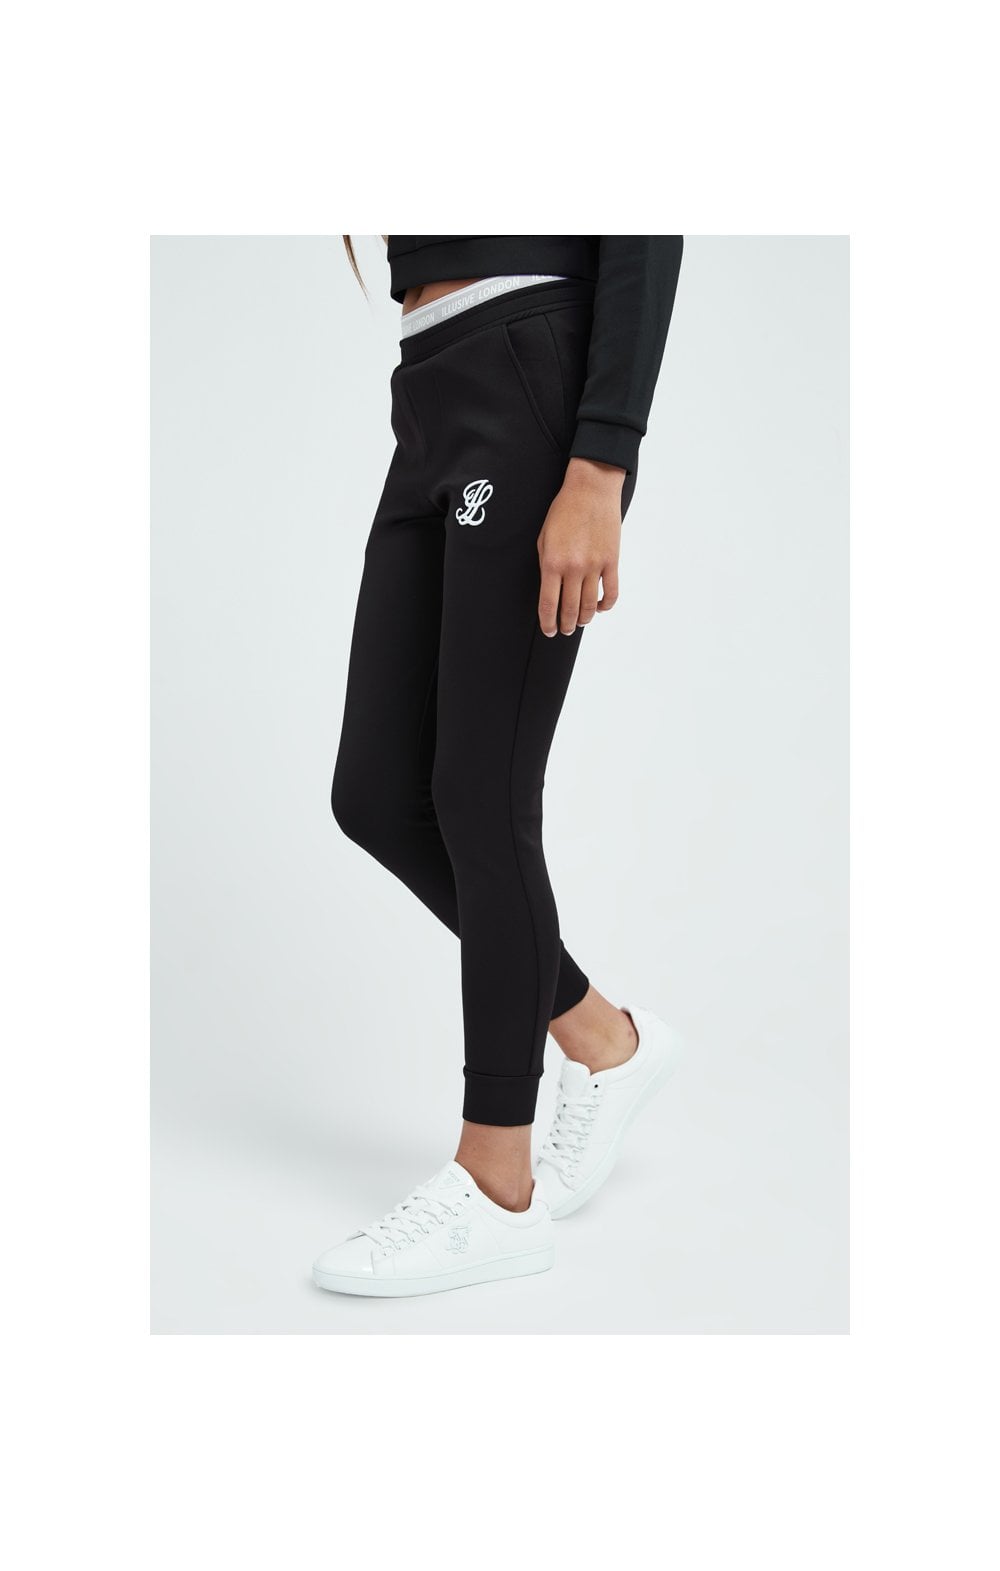 Load image into Gallery viewer, Illusive London Tape Track Pants - Black (1)